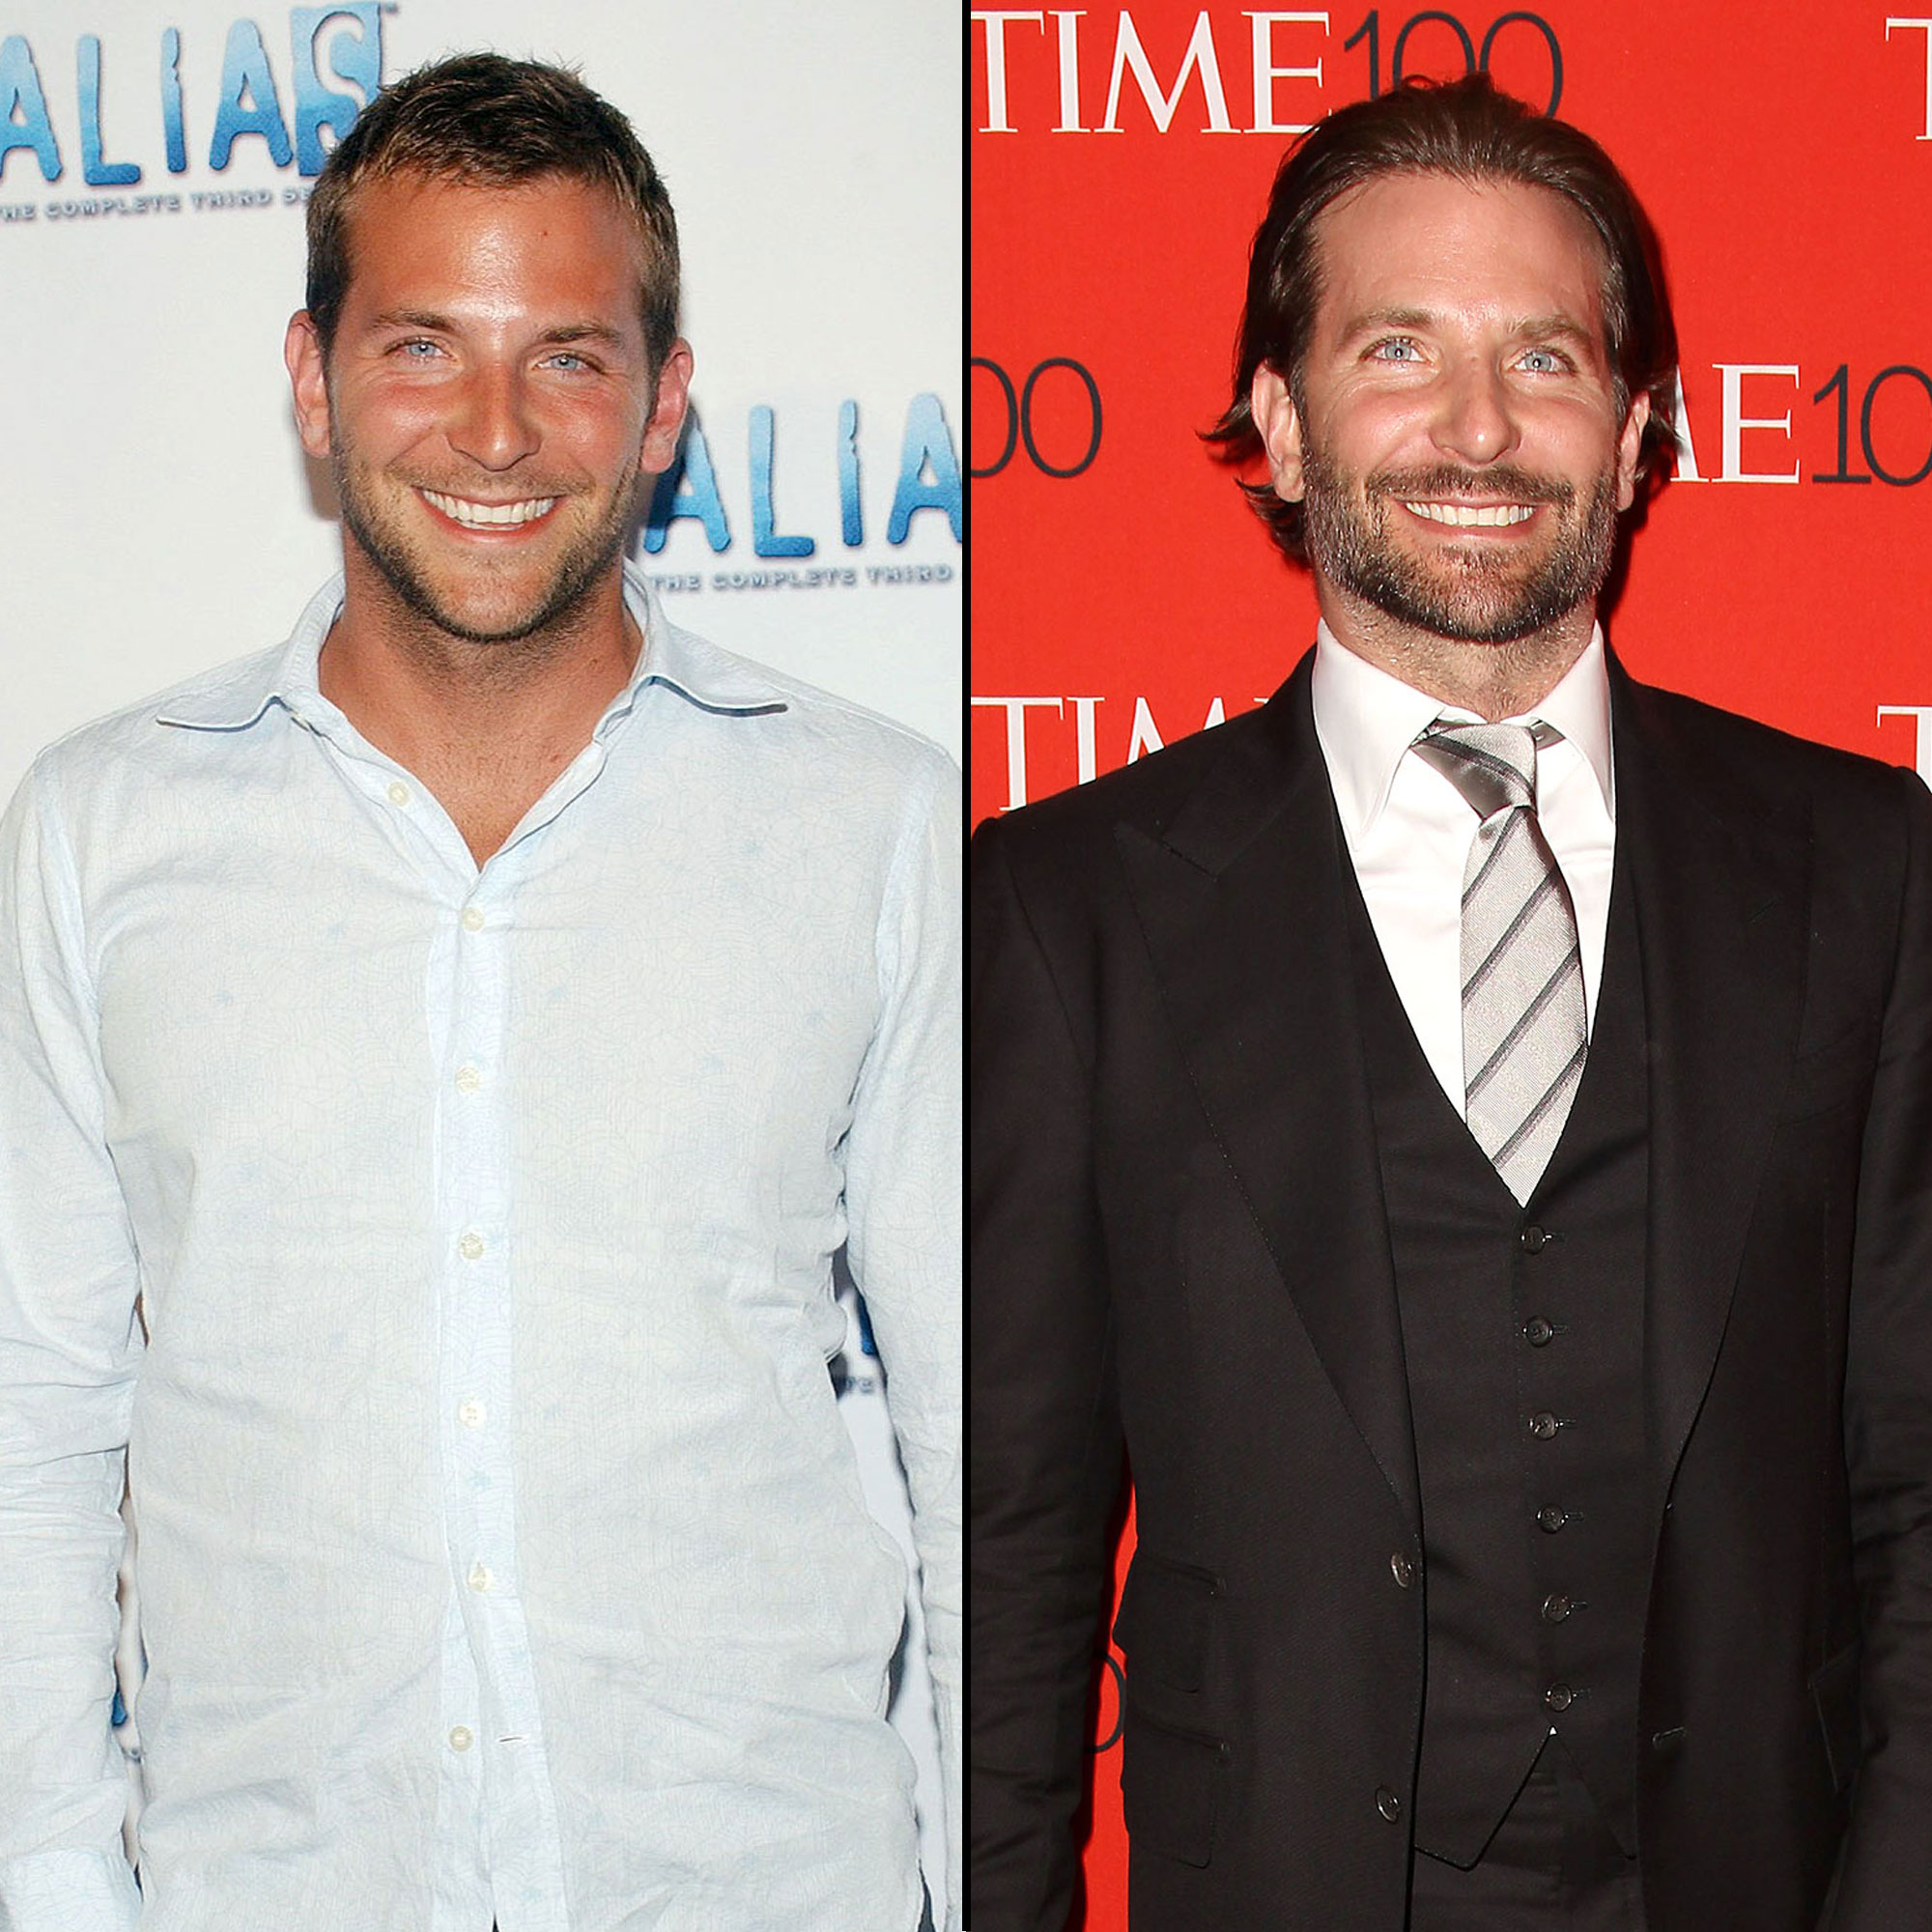 Why Did Bradley Cooper Leave 'Alias'? Let's Get Into It